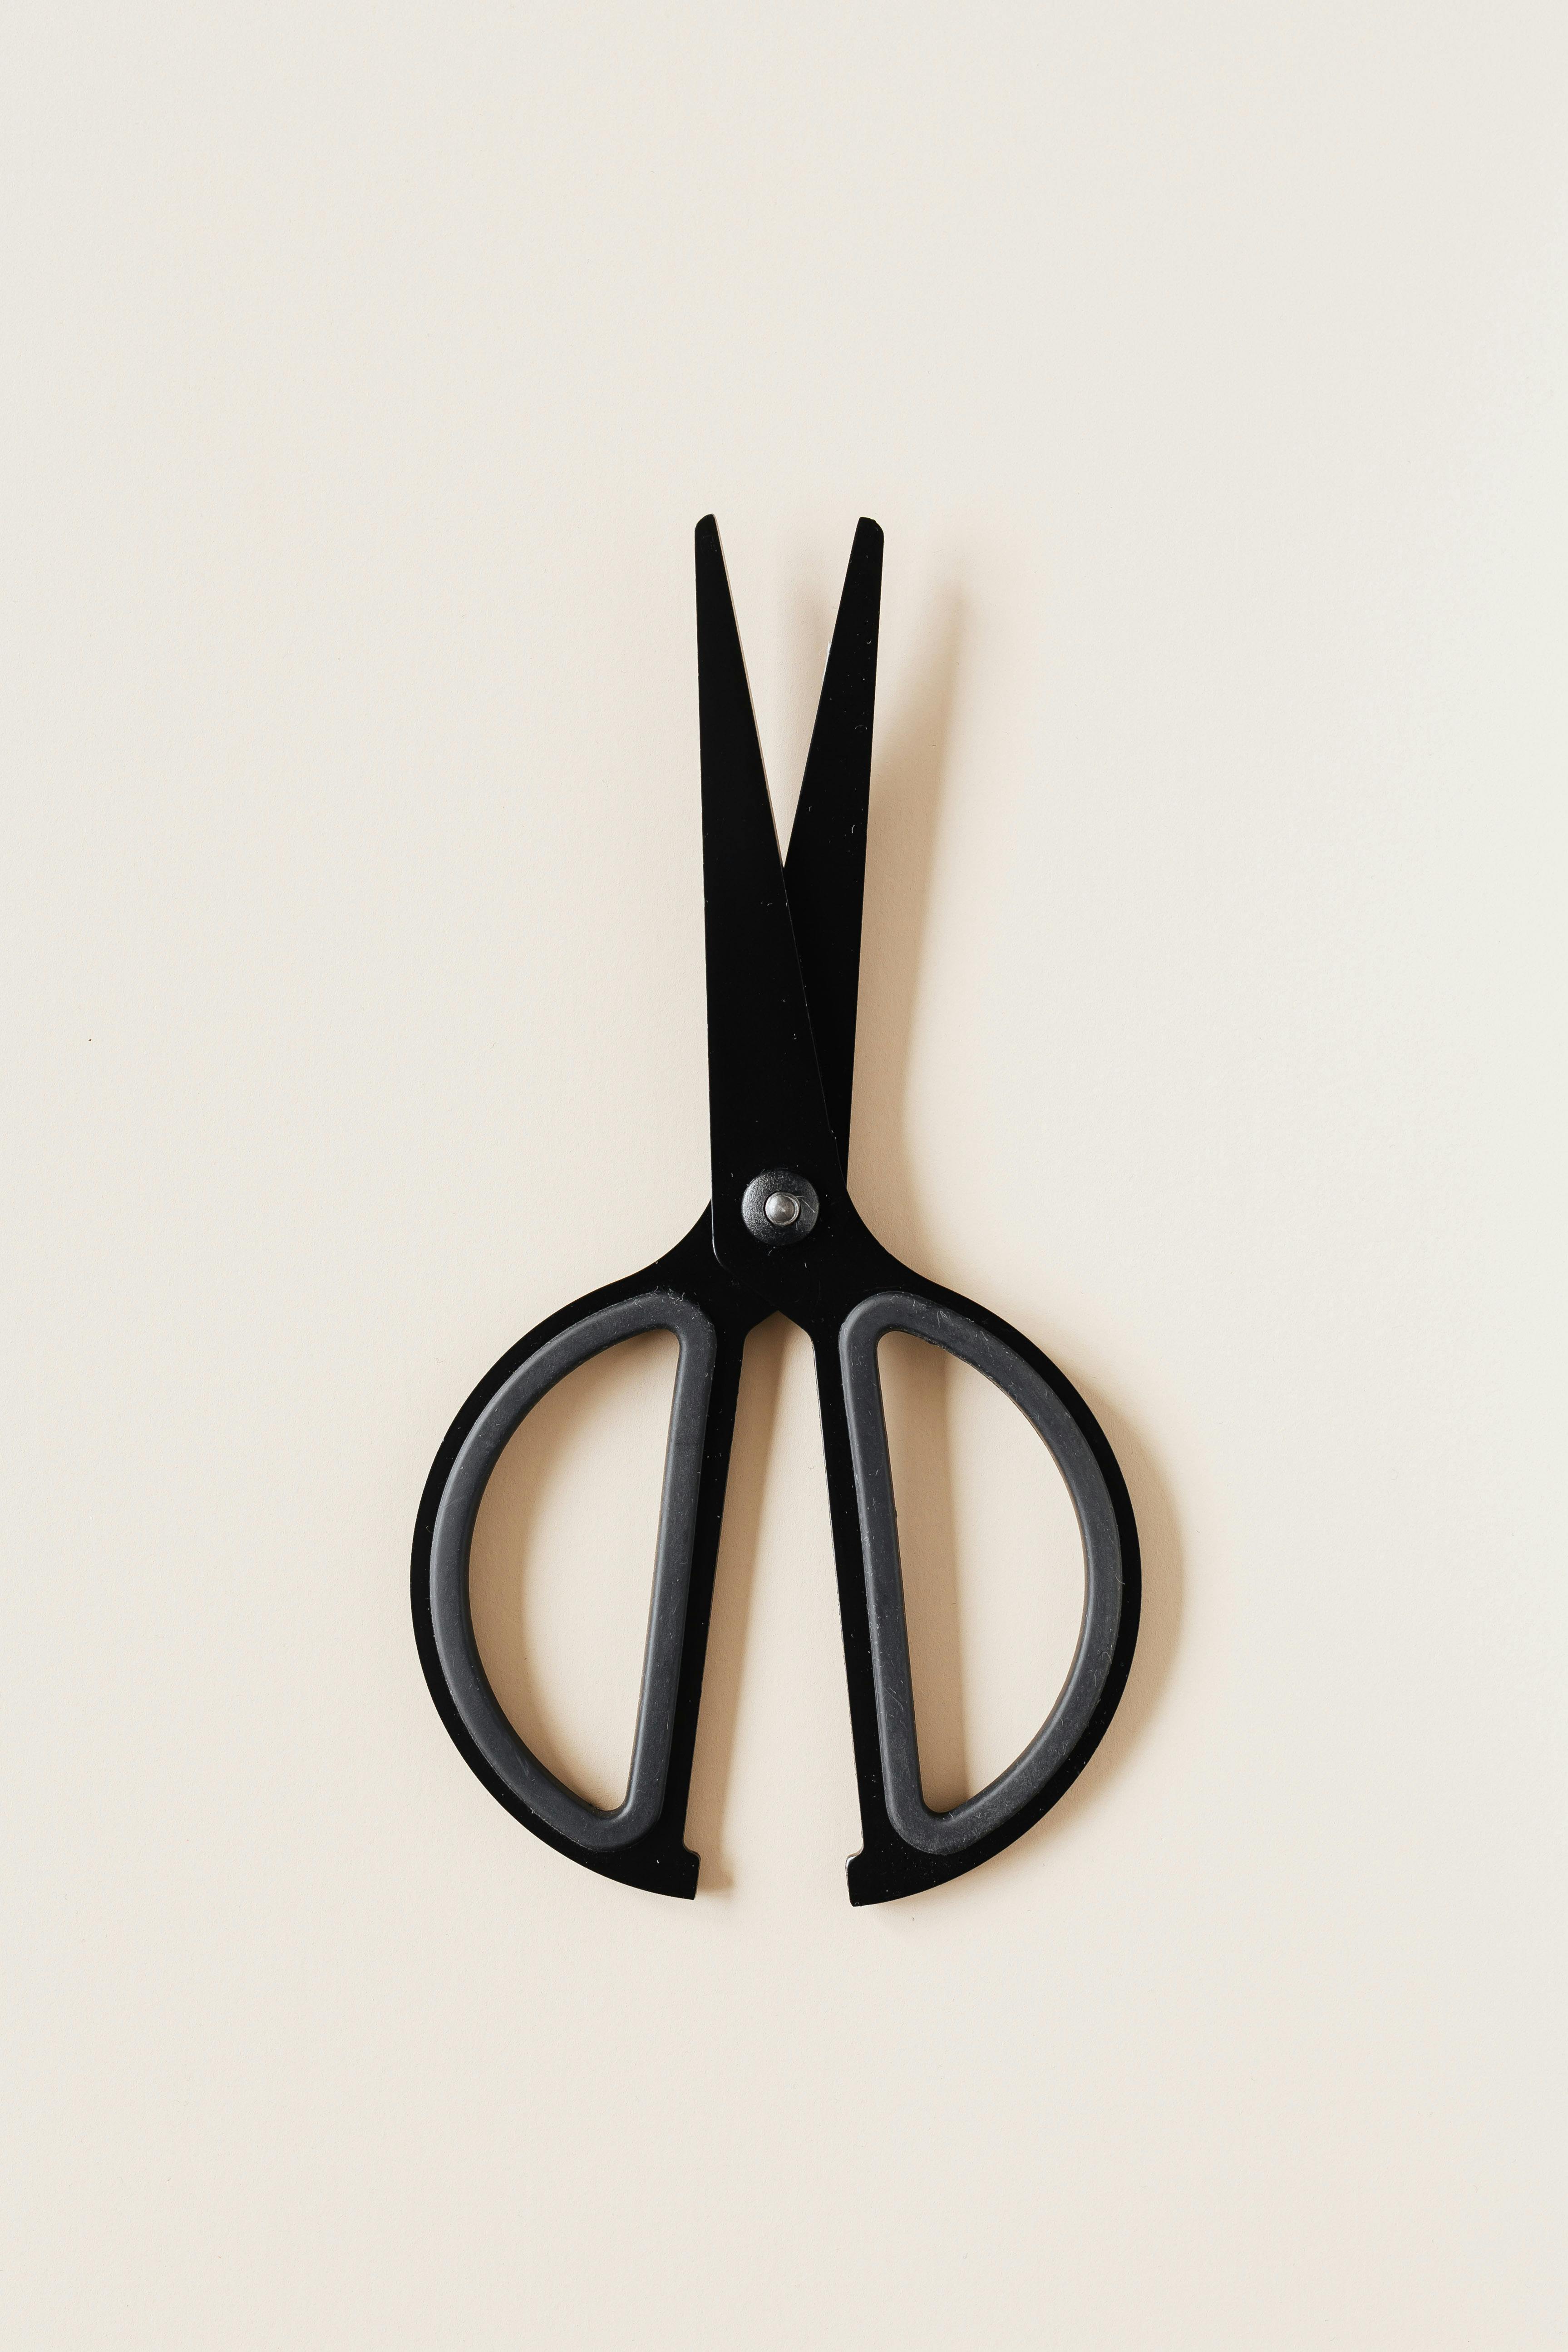 Black Knitting Scissors Isolated On White Background Stock Photo, Picture  and Royalty Free Image. Image 79855632.